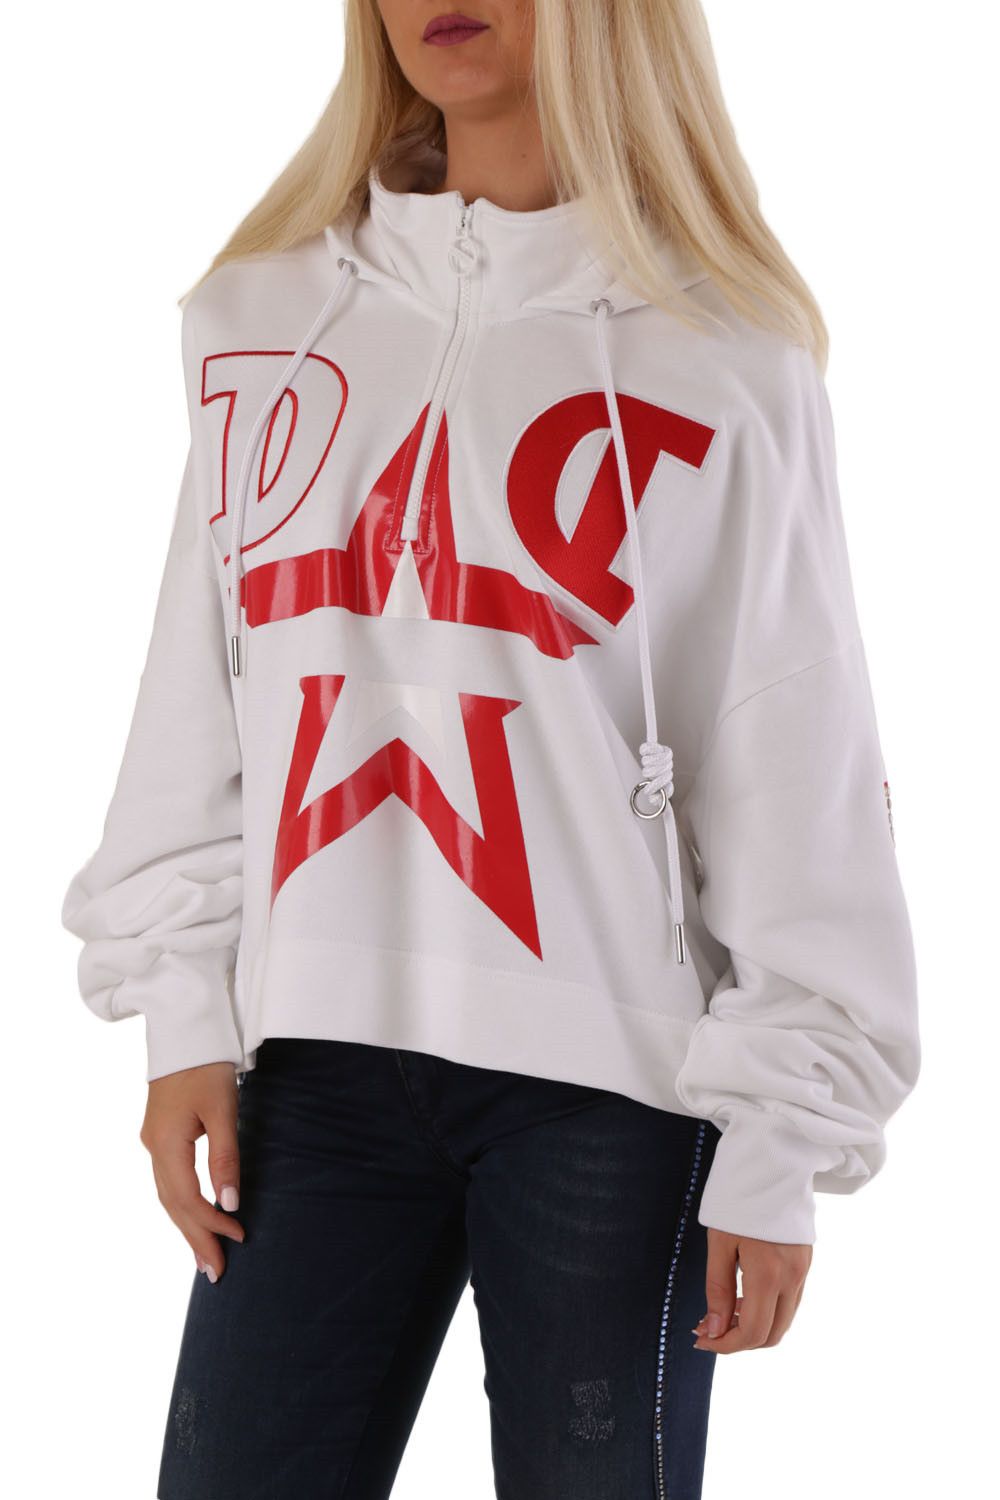 Brand: Diesel
Gender: Women
Type: Sweatshirts
Season: All seasons

PRODUCT DETAIL
• Color: white
• Pattern: print
• Fastening: slip on
• Sleeves: long
• Collar: hood

COMPOSITION AND MATERIAL
• Composition: -100% cotton 
•  Washing: machine wash at 30°